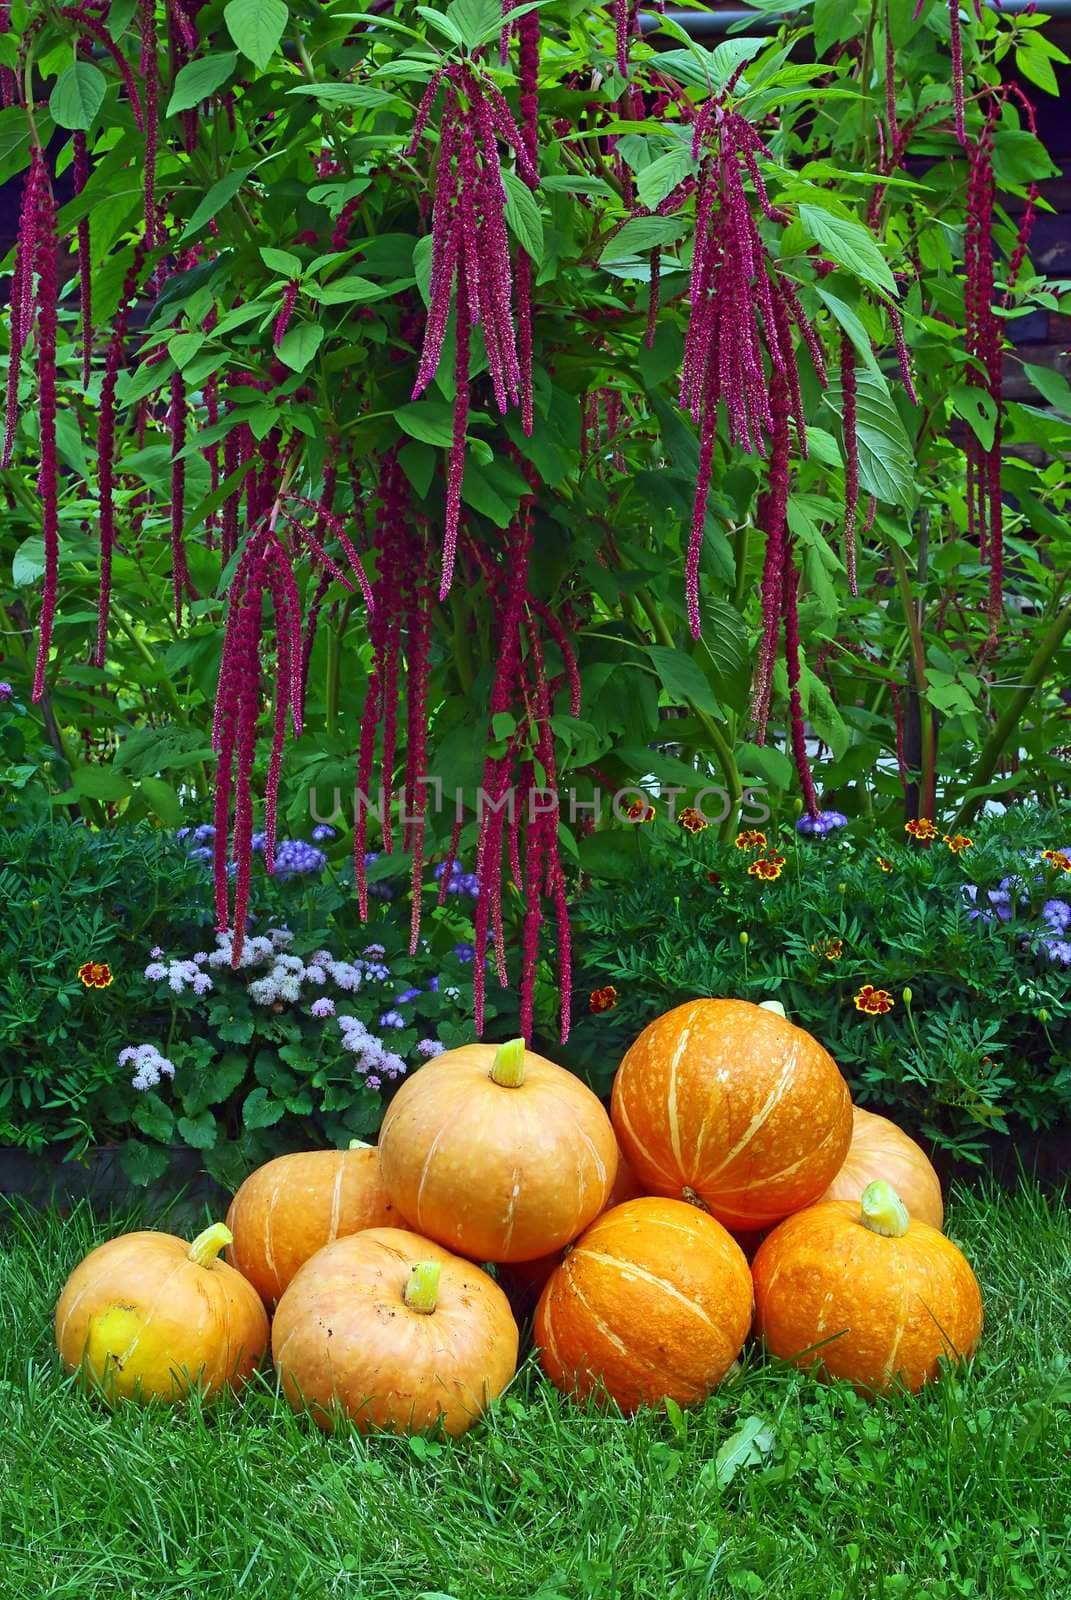 A pile of pumpkins on red amaranth plant background